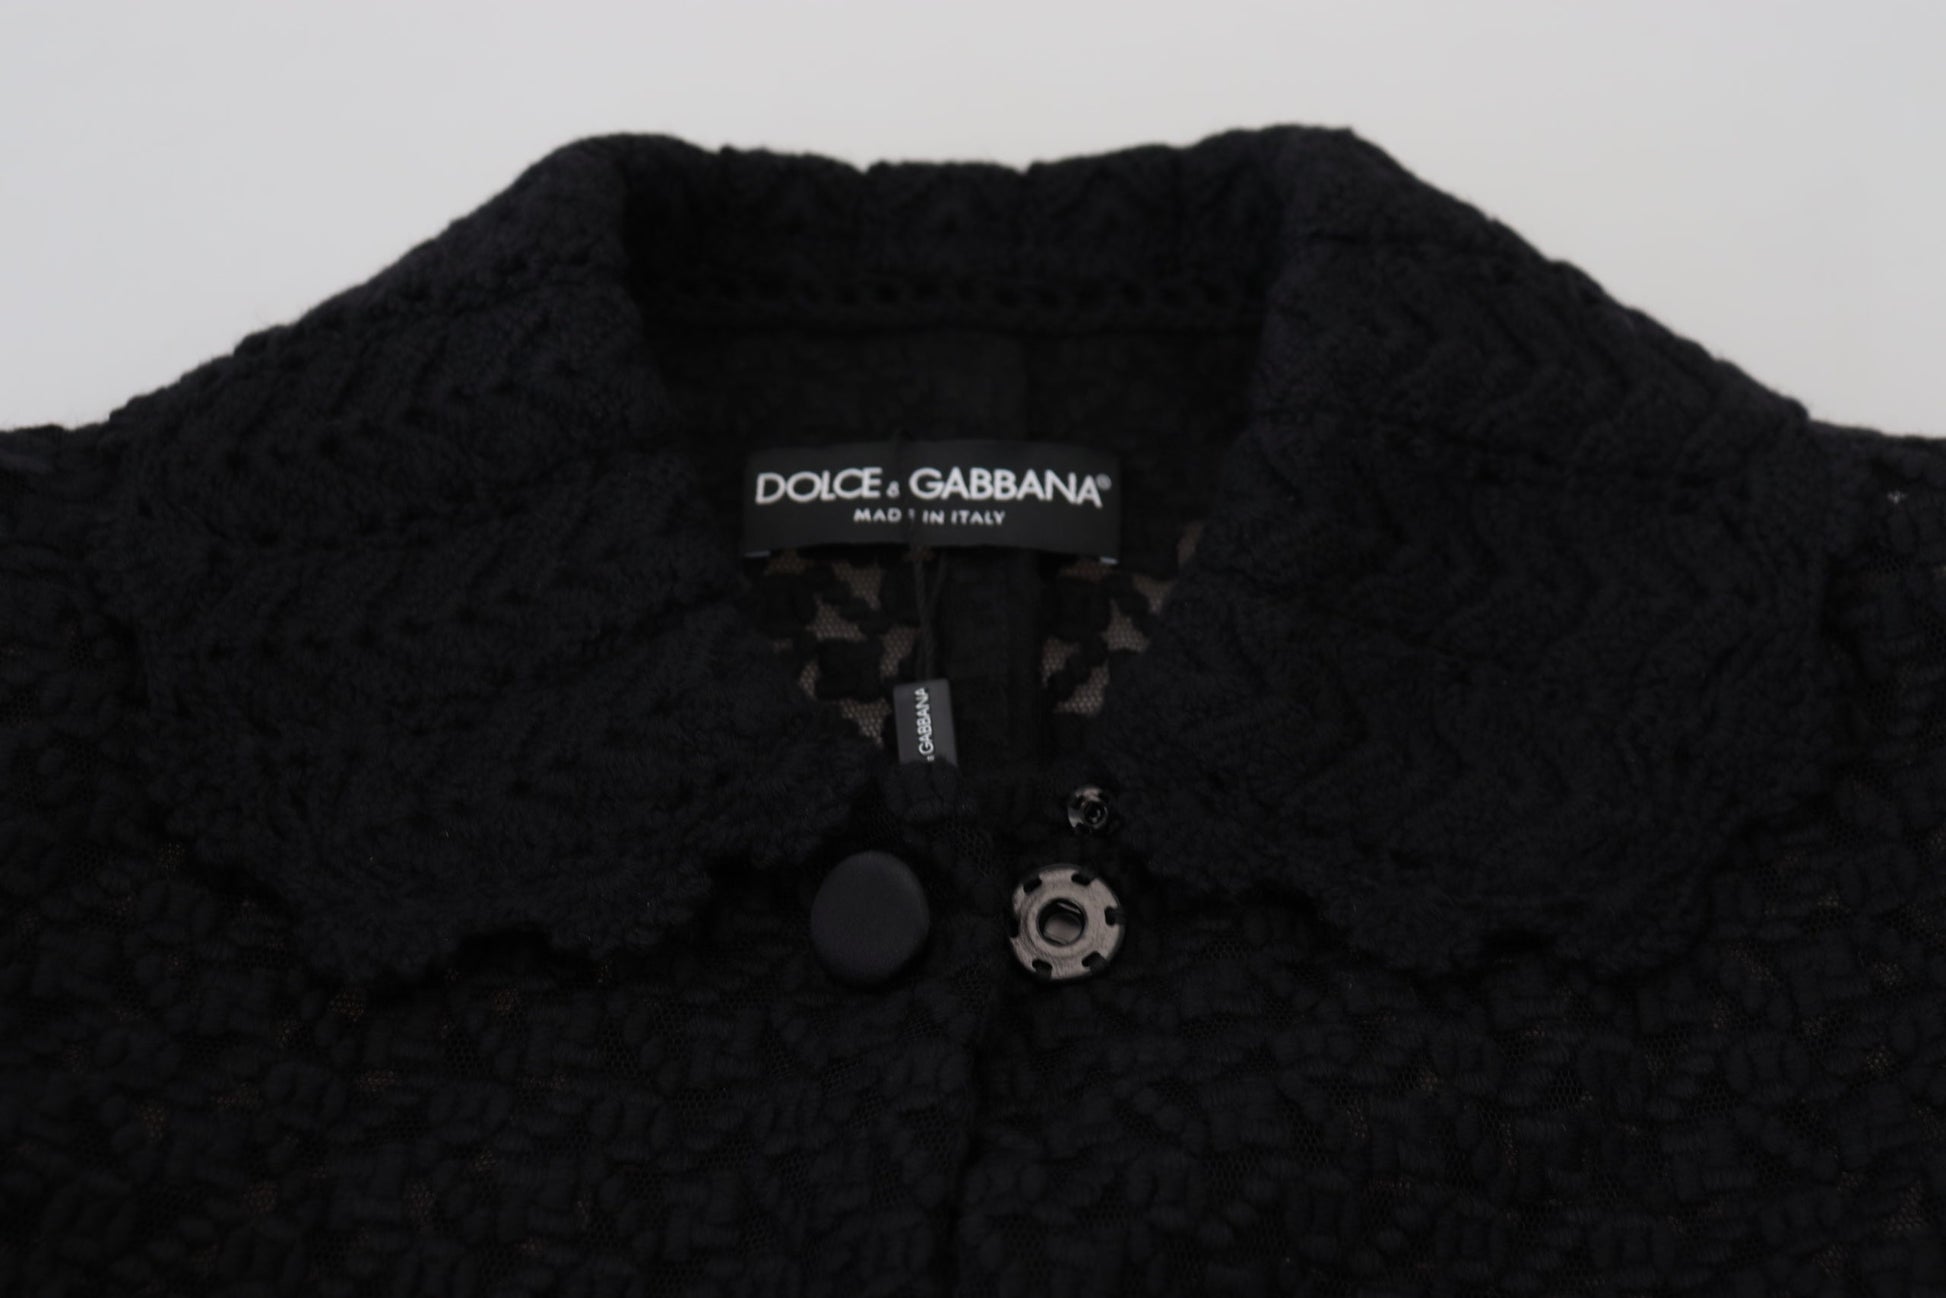 Dolce & Gabbana Black Button Down Long Blazer Cotton Jacket - Designed by Dolce & Gabbana Available to Buy at a Discounted Price on Moon Behind The Hill Online Designer Discount Store